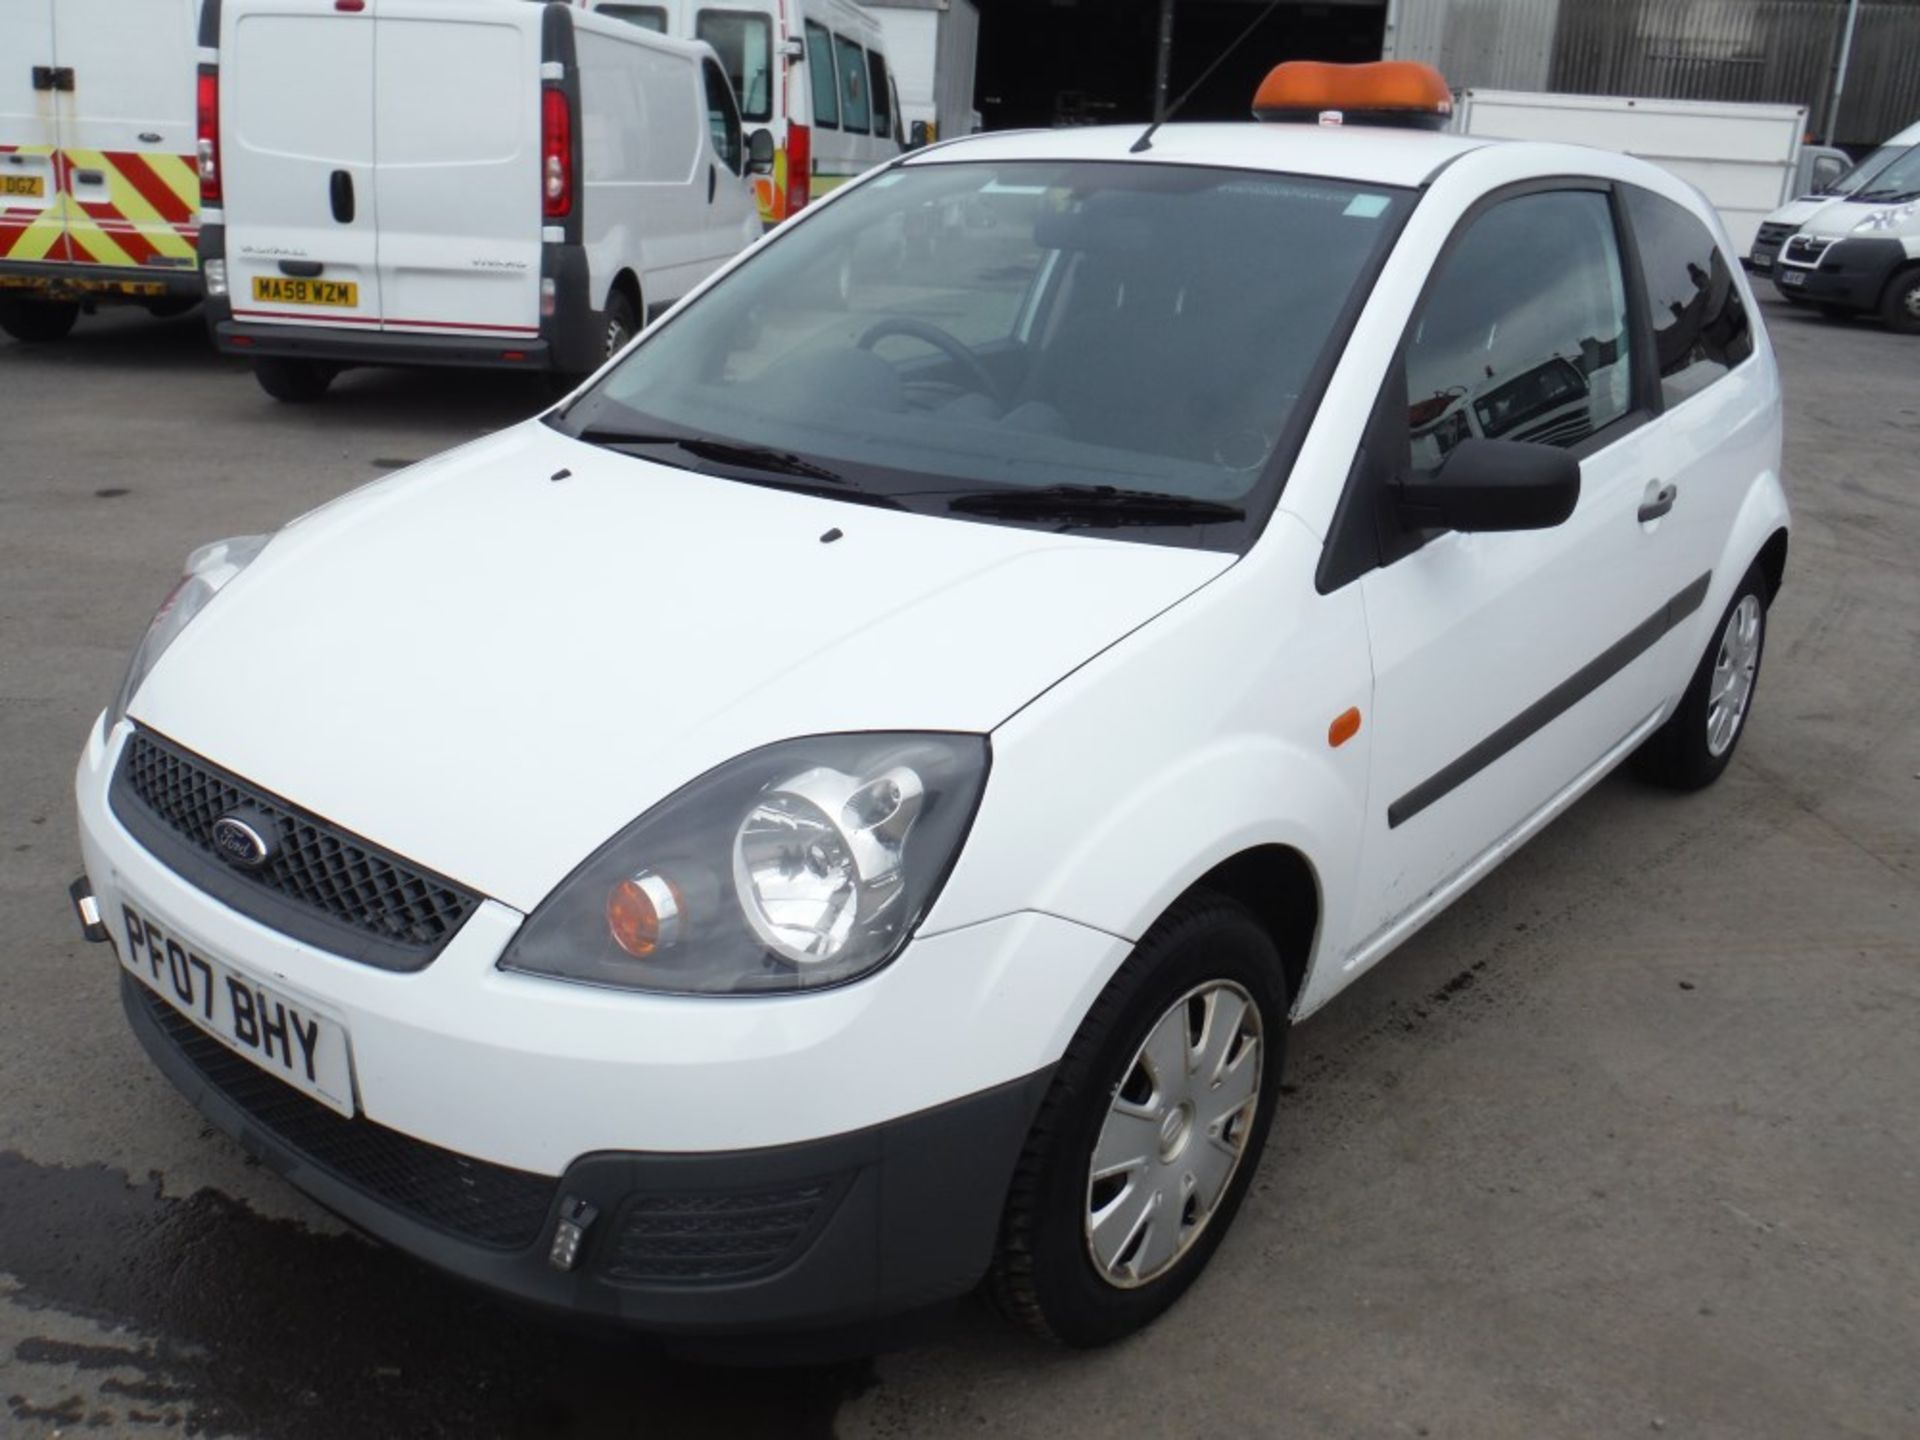 07 reg FORD FIESTA TDCI VAN, 1ST REG 05/07, 161824M, V5 HERE, 1OWNER FROM NEW (DIRECT COUNCIL) [+ - Image 2 of 5